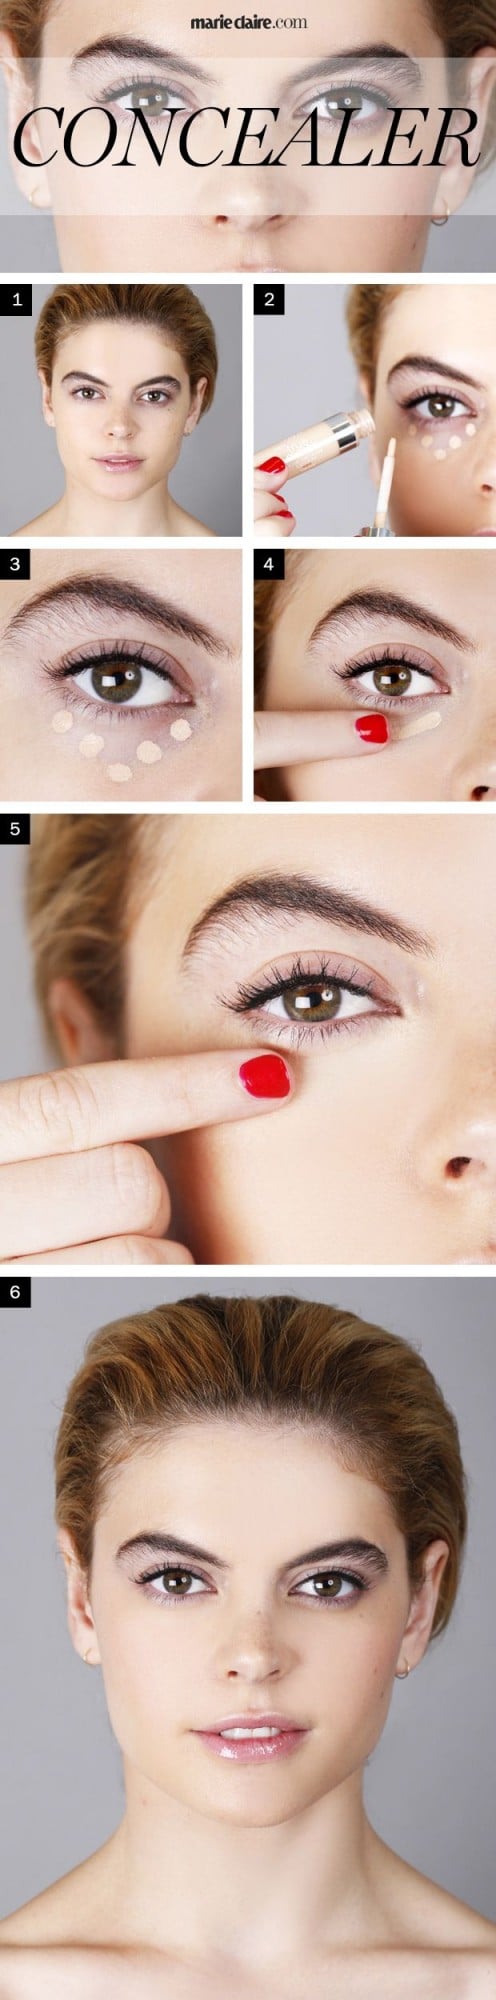 16 Makeup Tricks For Flawless Look Every Woman Should Know (13)